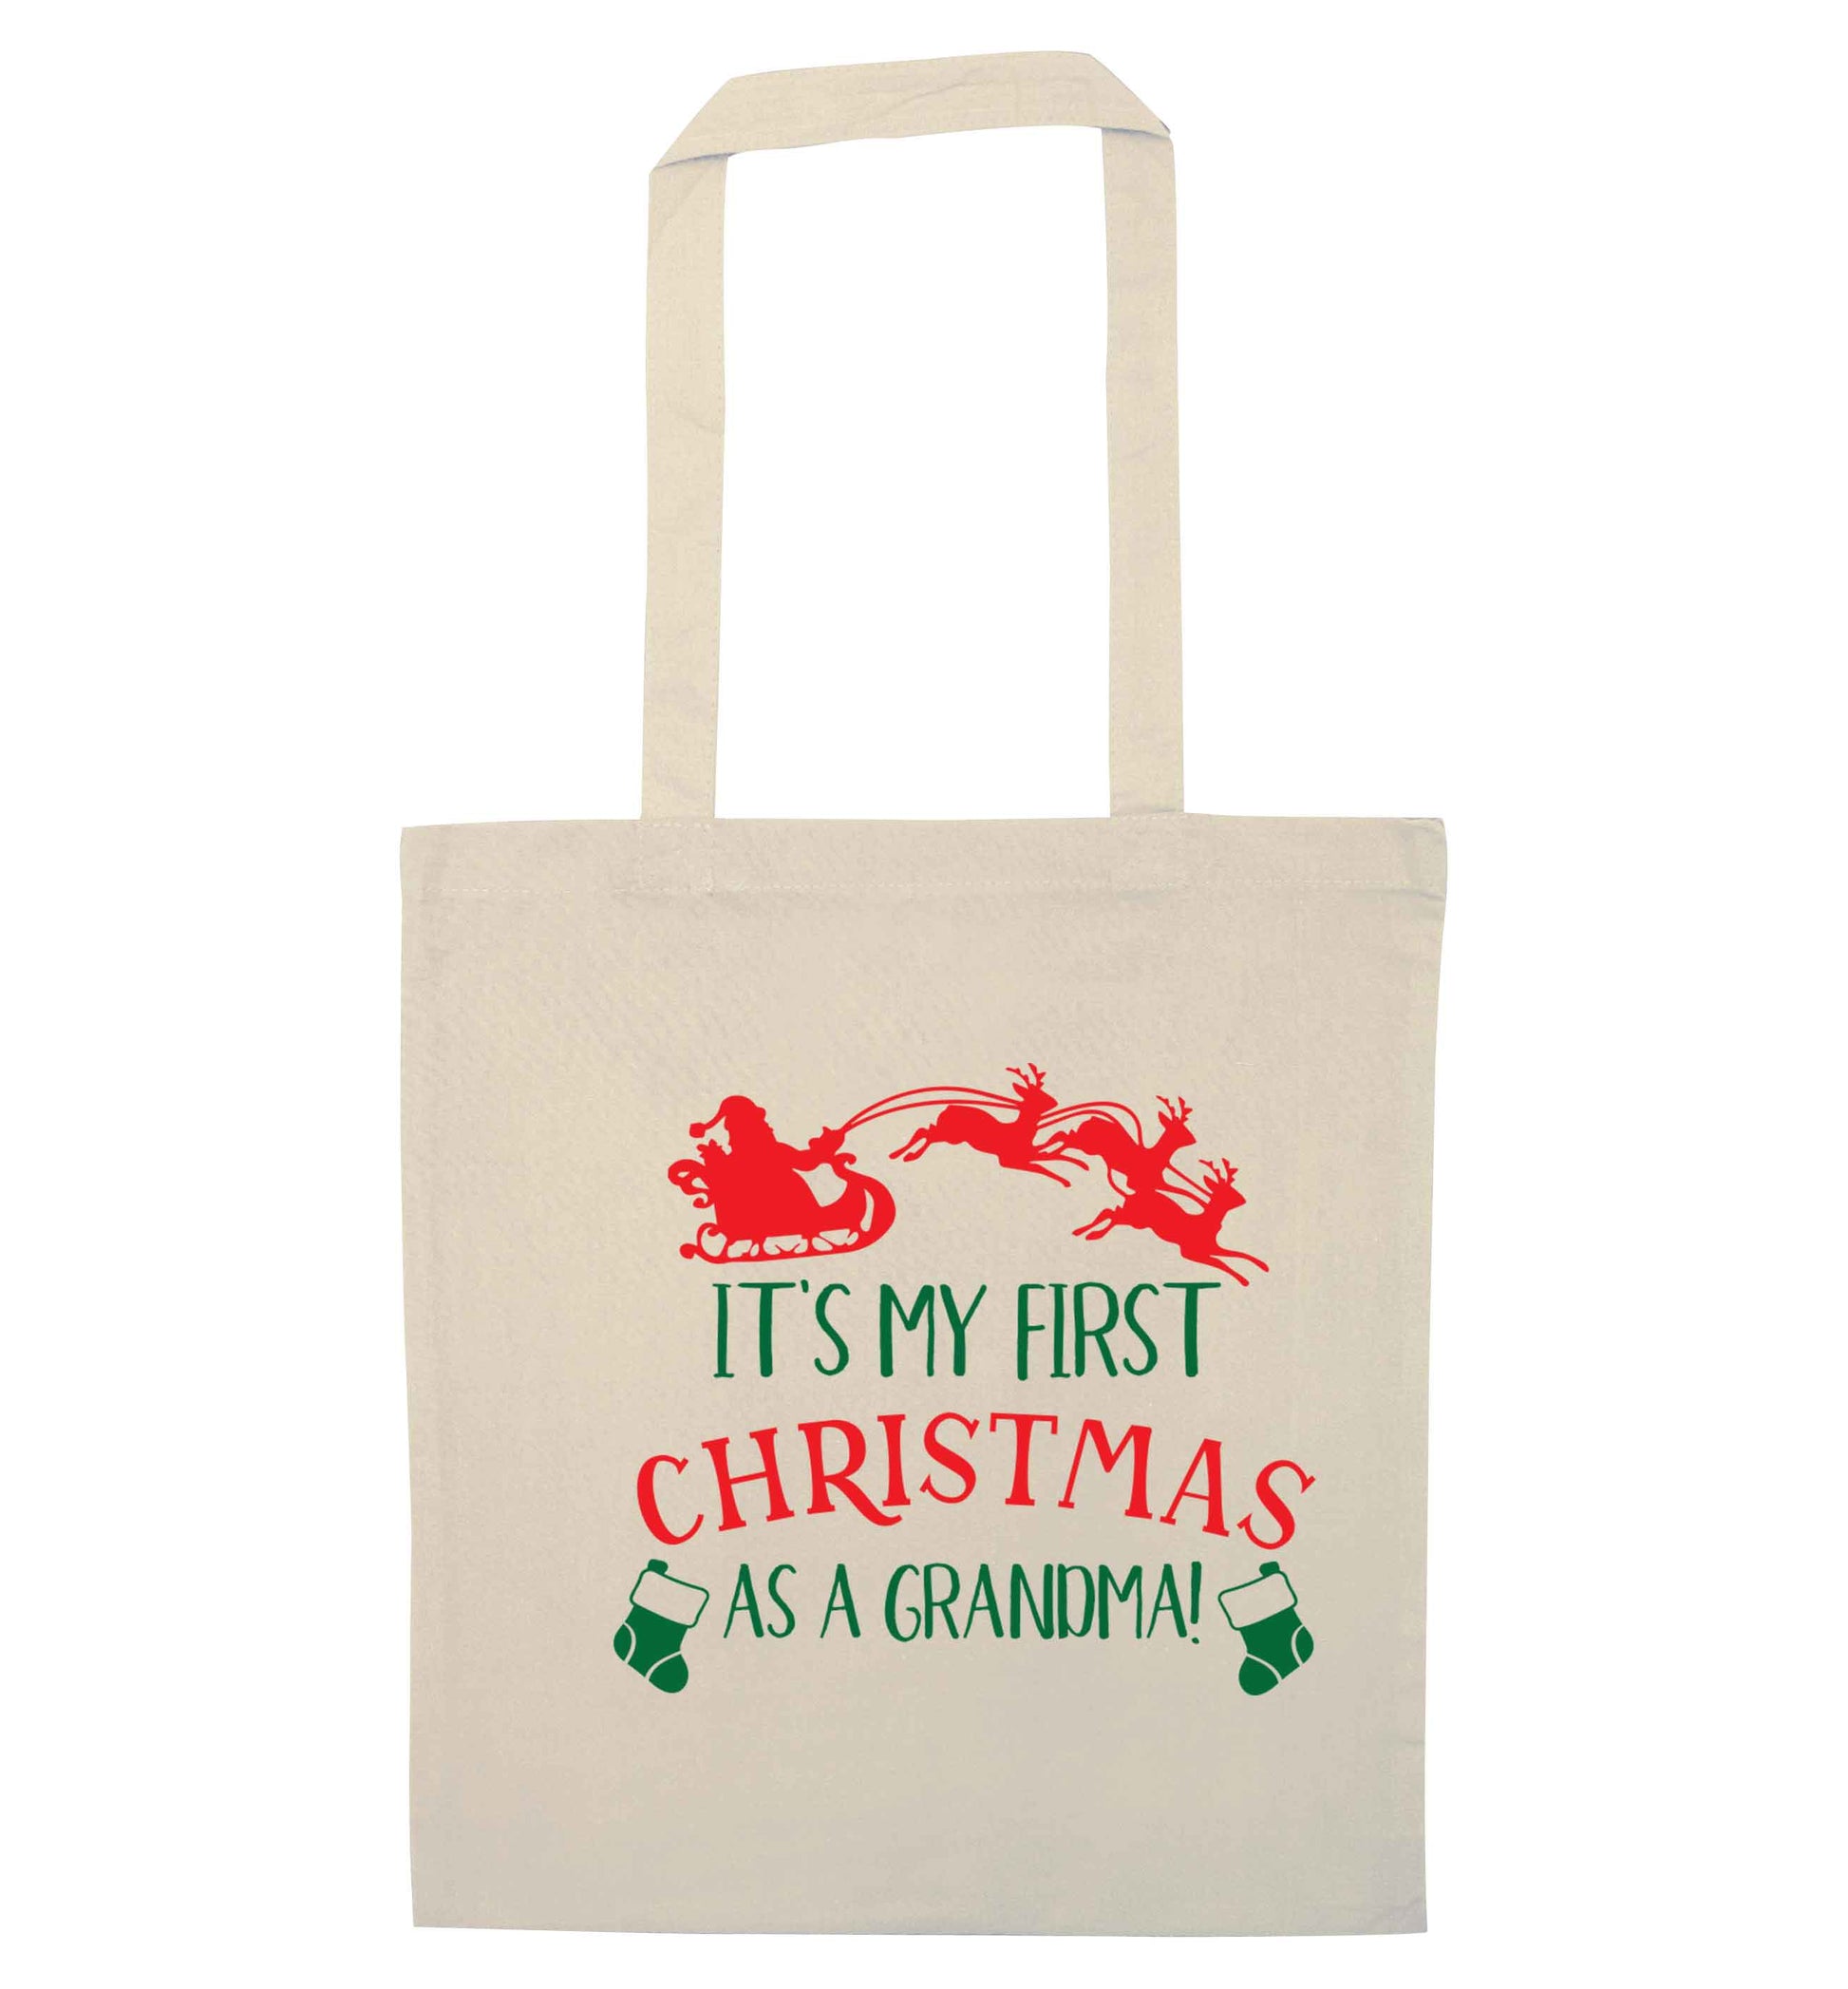 It's my first Christmas as a grandma! natural tote bag